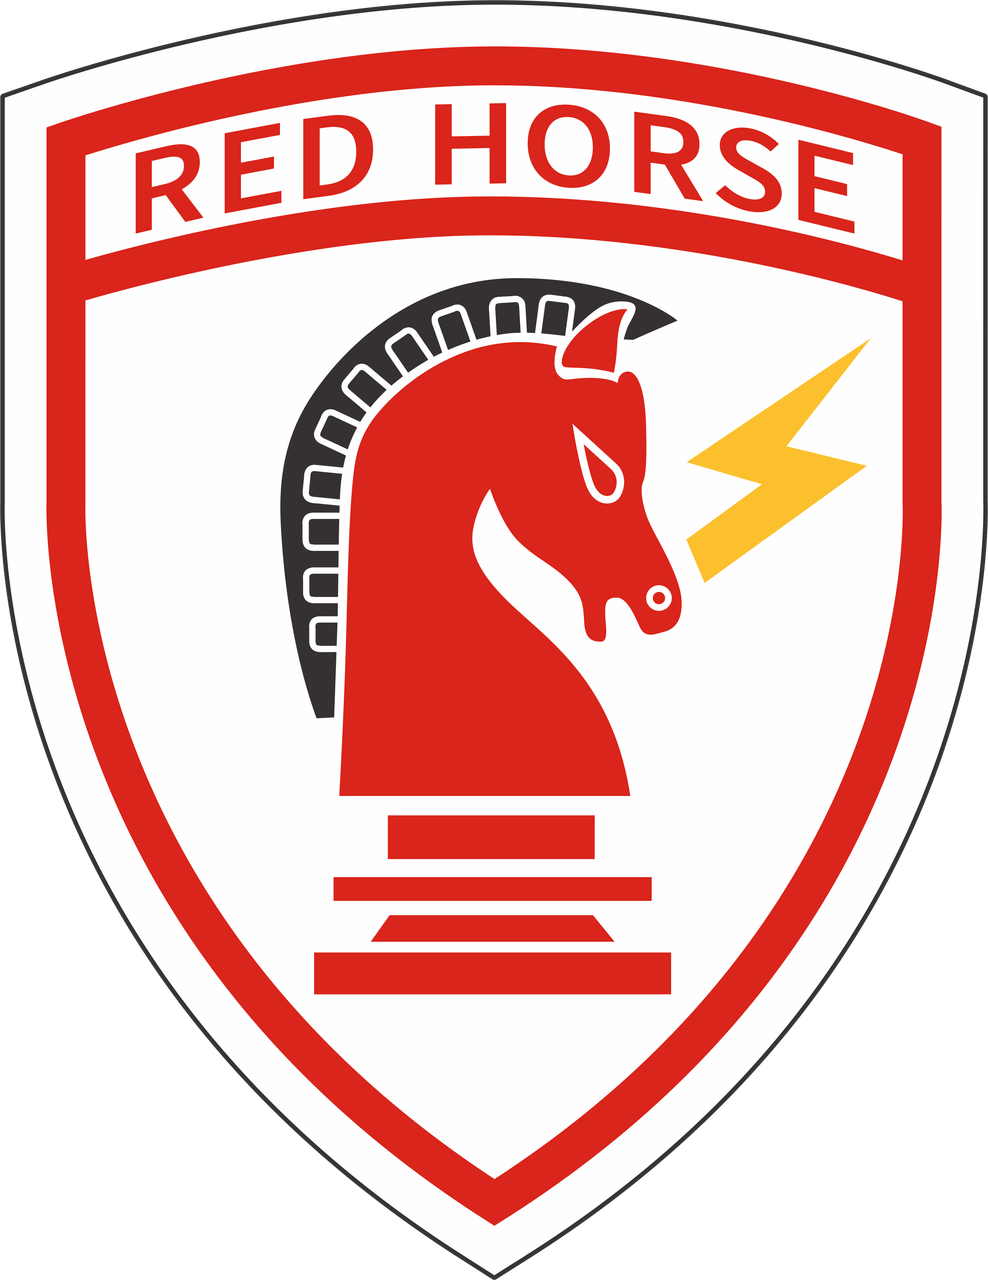 Red Horse Logo - Prime Beef and Red Horse 50th Anniversery Shirt